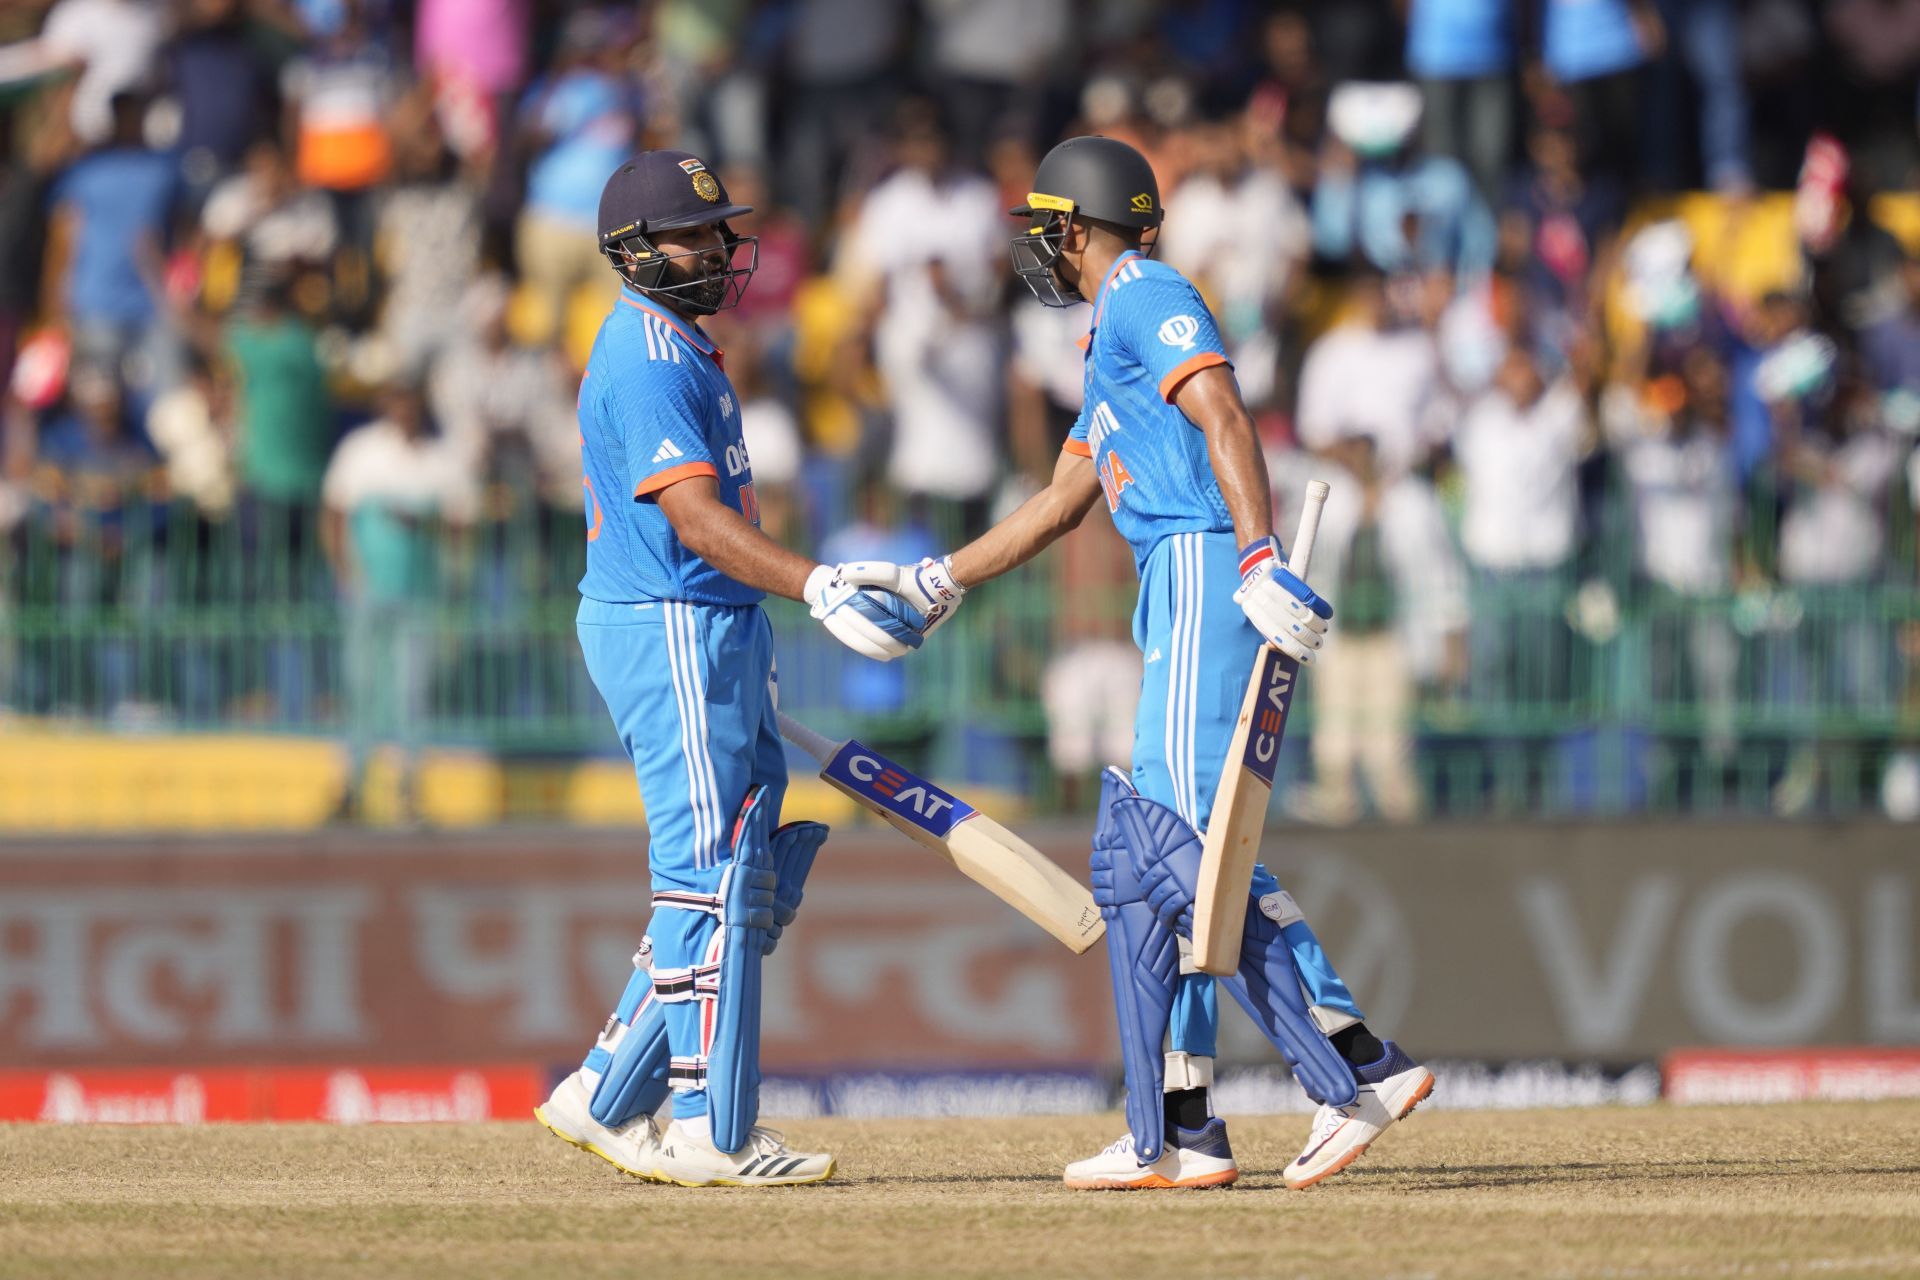 Openers Shubman Gill (right) and captain Rohit Sharma set the tone of the innings on Sunday by featuring in a 121-run stand for the first wicket. Both struck impressive half-centuries. While Rohit scored 56 off 49 balls, Gill hit 58 off 52. (Pic: AP Photo/Eranga Jayawardena)